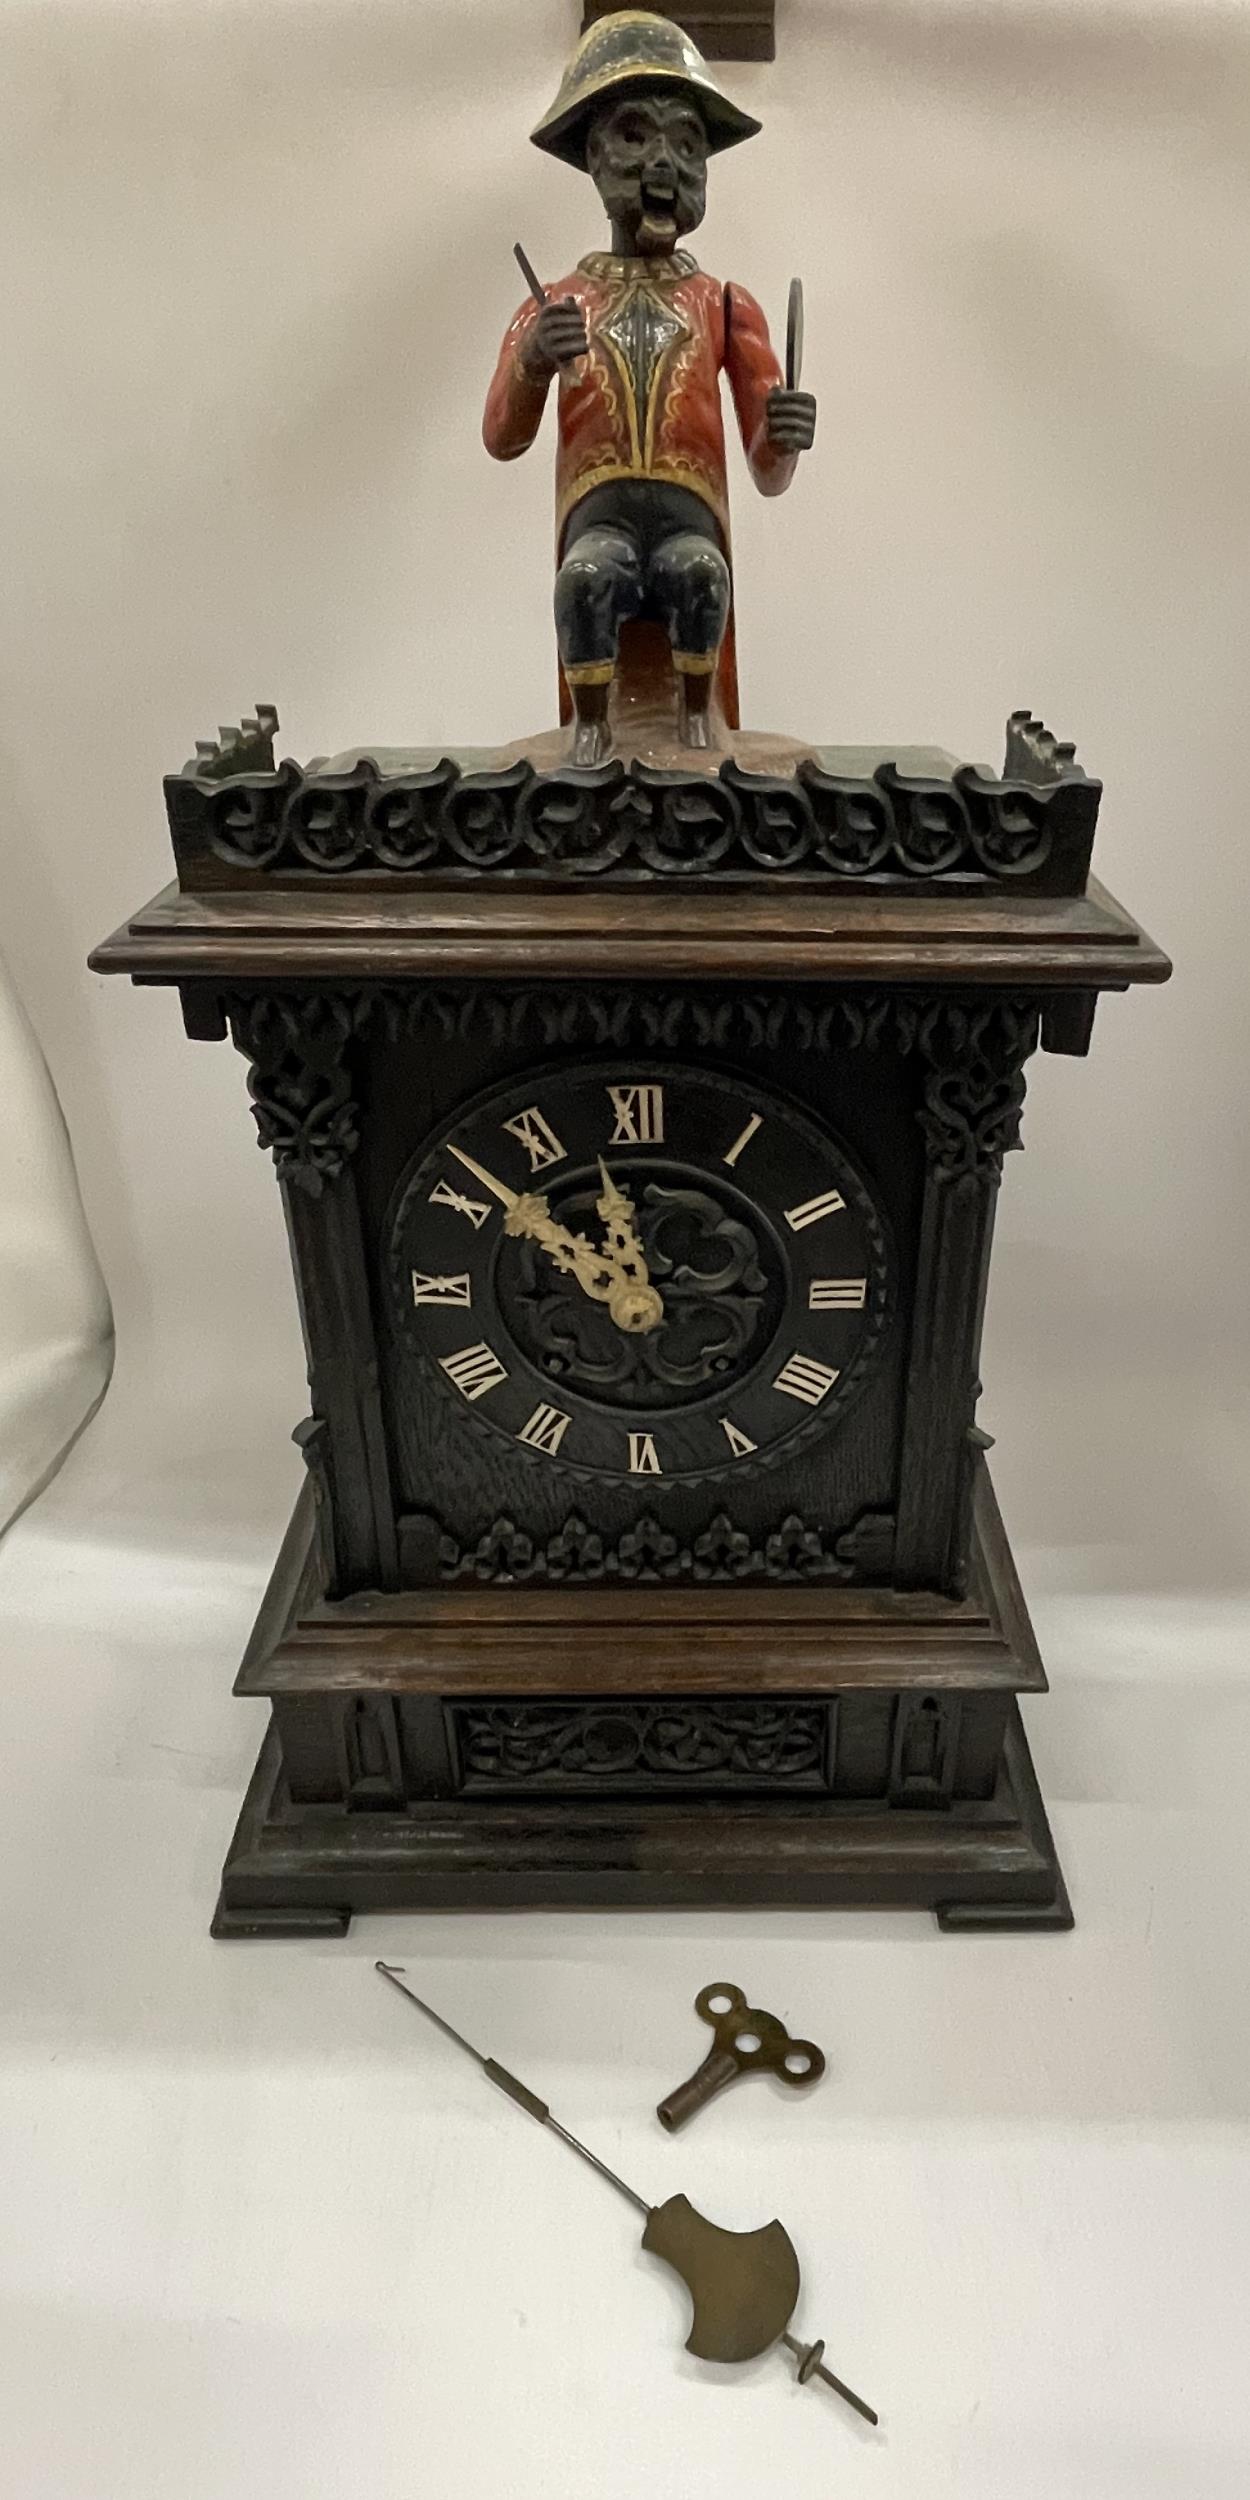 AN EARLY 20TH CENTURY NOVELTY AUTOMATION CARVED DARK OAK MANTLE CLOCK WITH NAPOLEONIC MONKEY